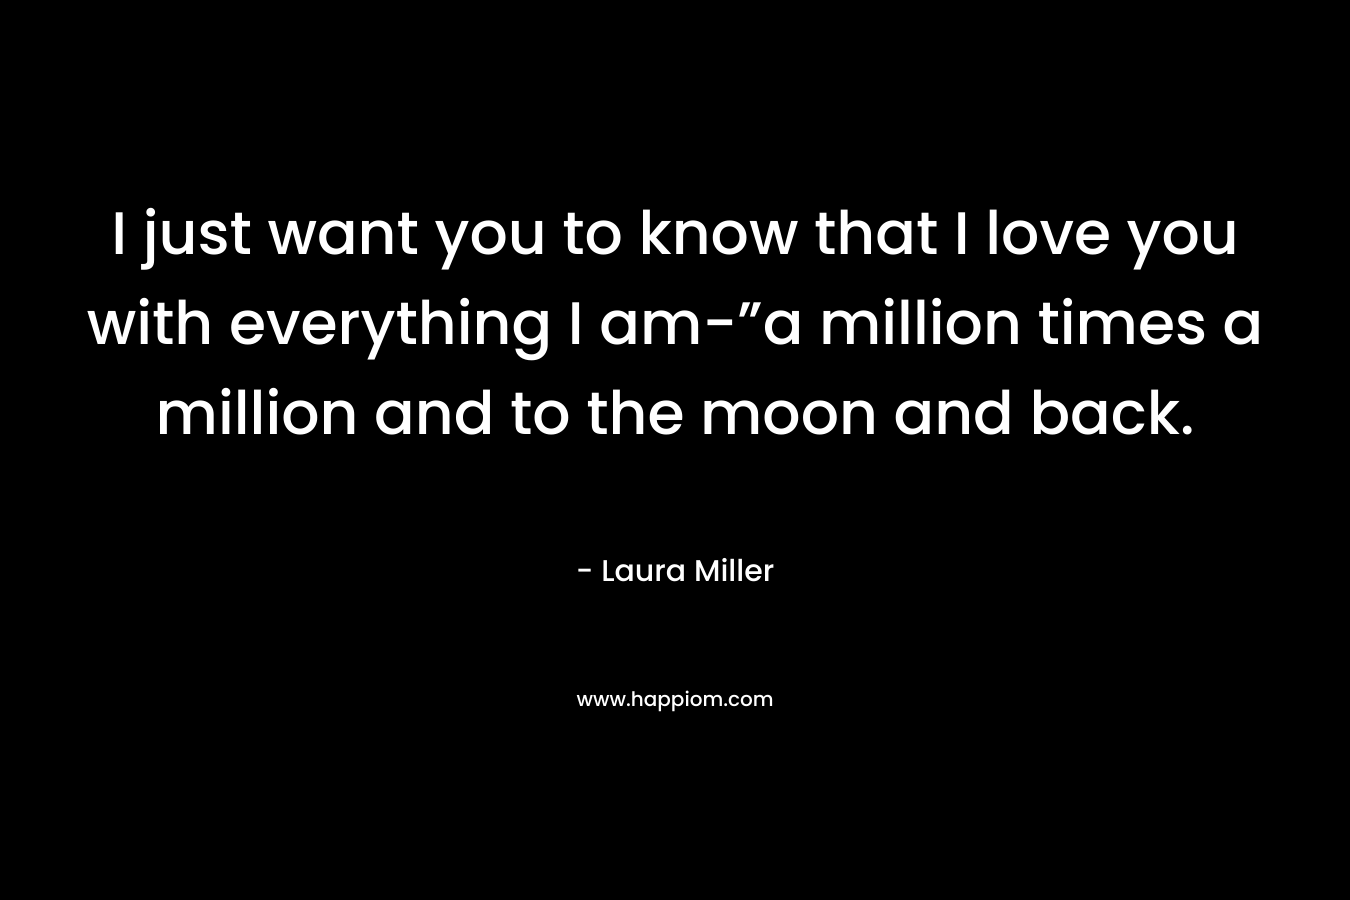 I just want you to know that I love you with everything I am-”a million times a million and to the moon and back.